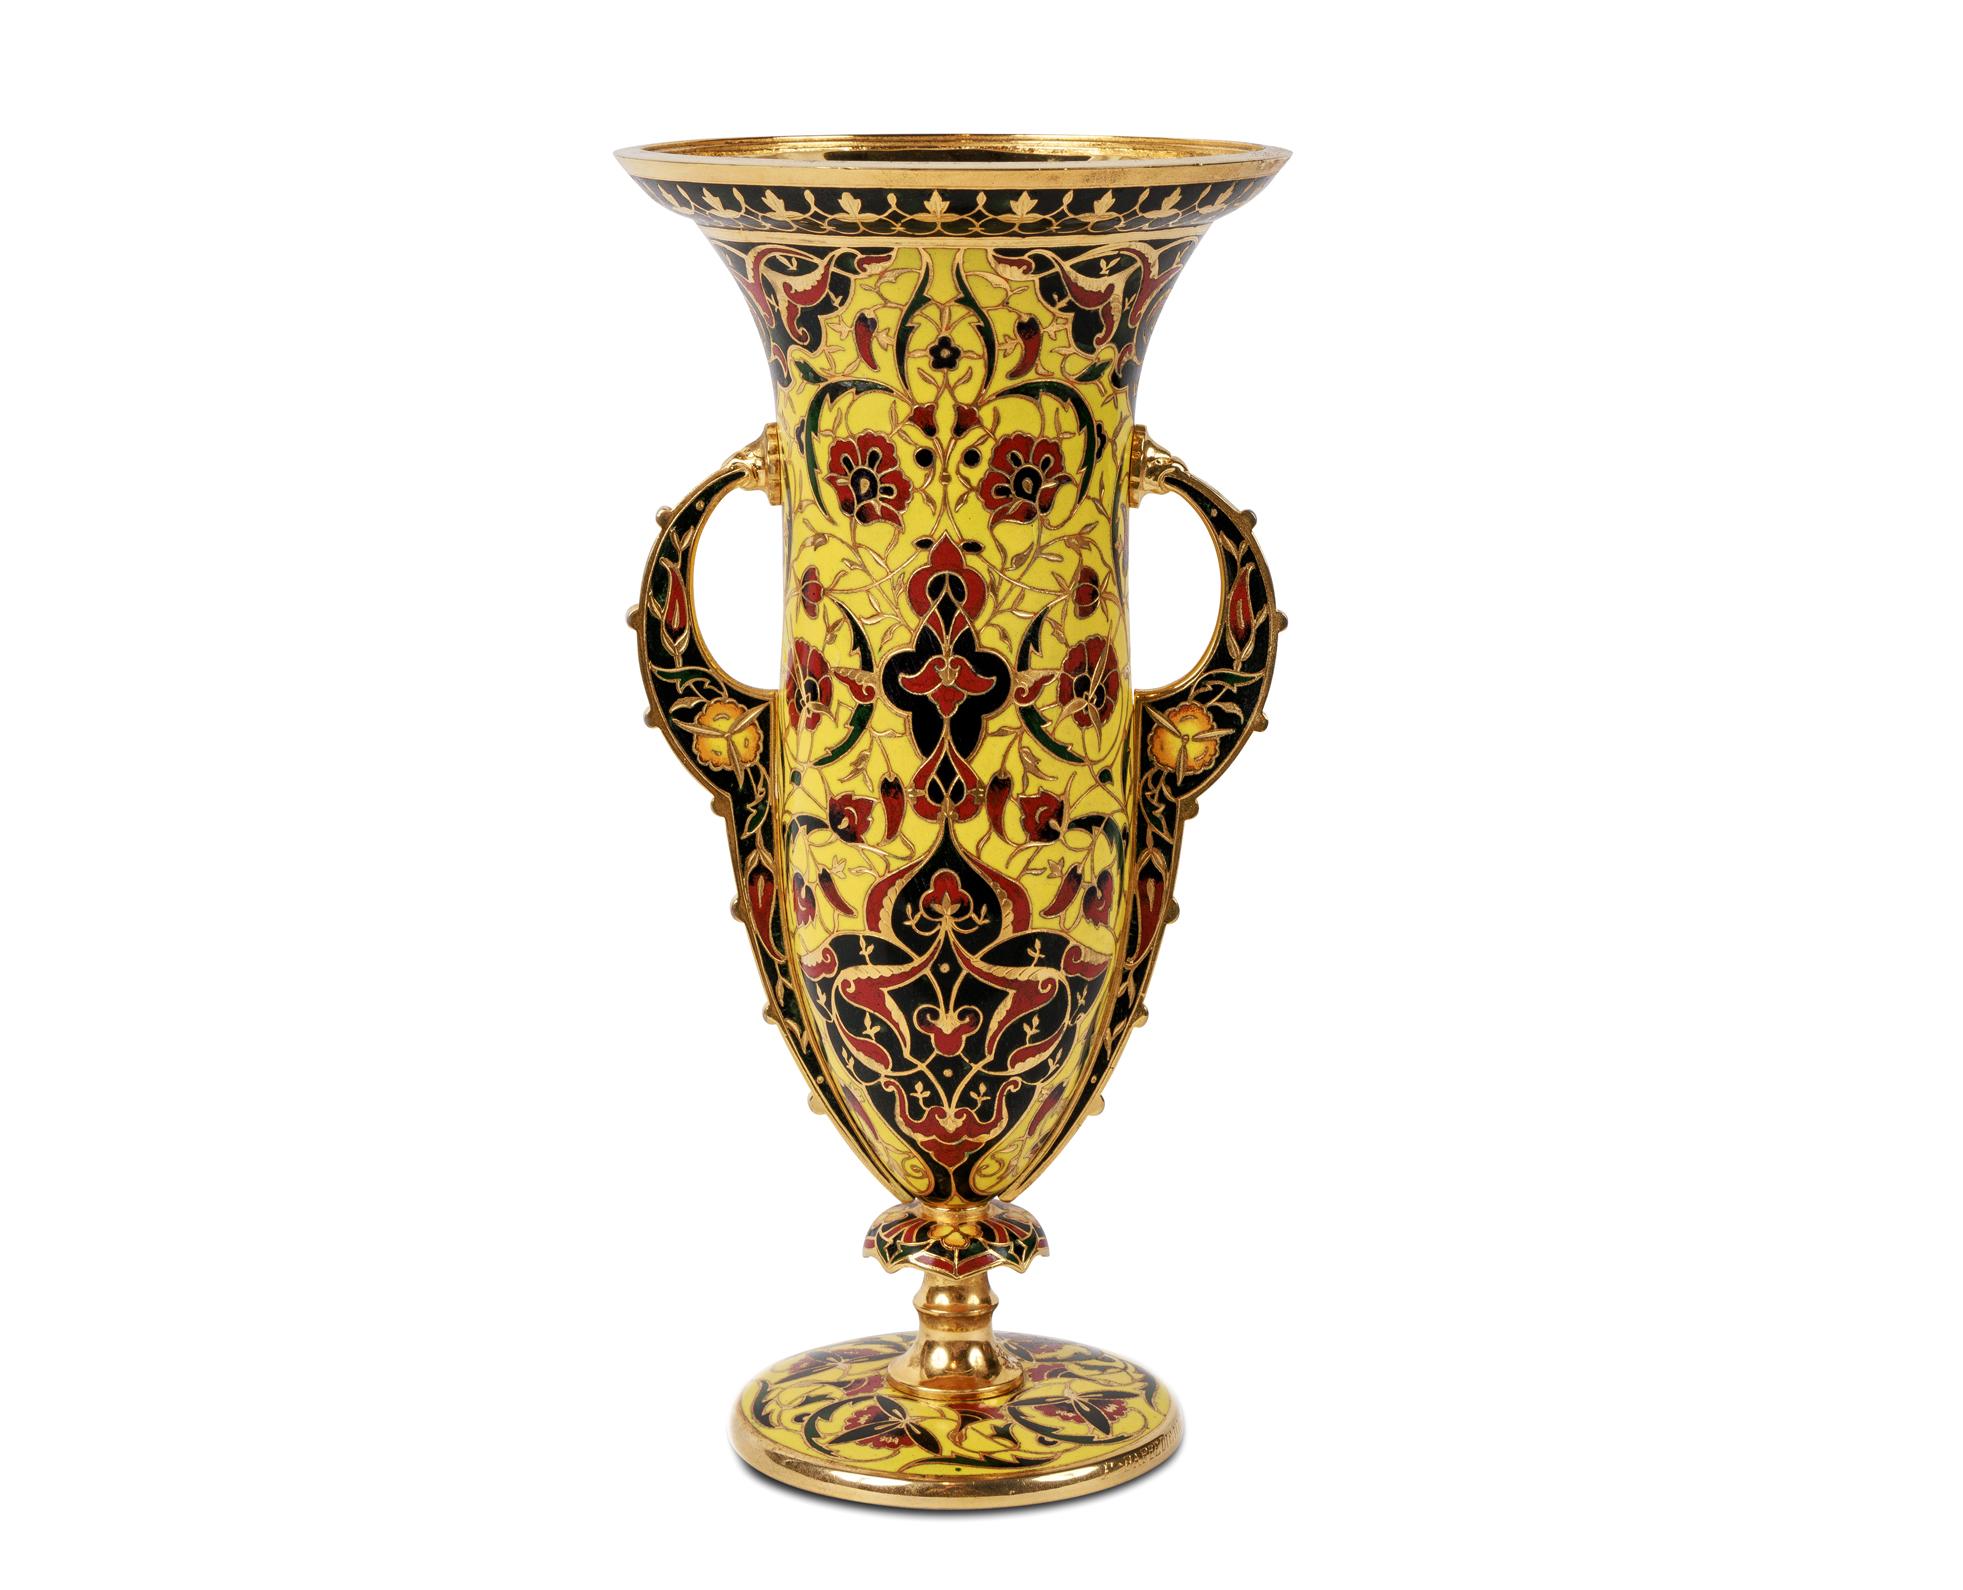 Ferdinand Barbedienne, A French Ormolu and Champleve Enamel Vase, C. 1870

In the Islamic / Alhambra taste. The two handled vase in Alhambra form, enameled in rich yellow throughout with highlights of green, red and black. 

Signed F.